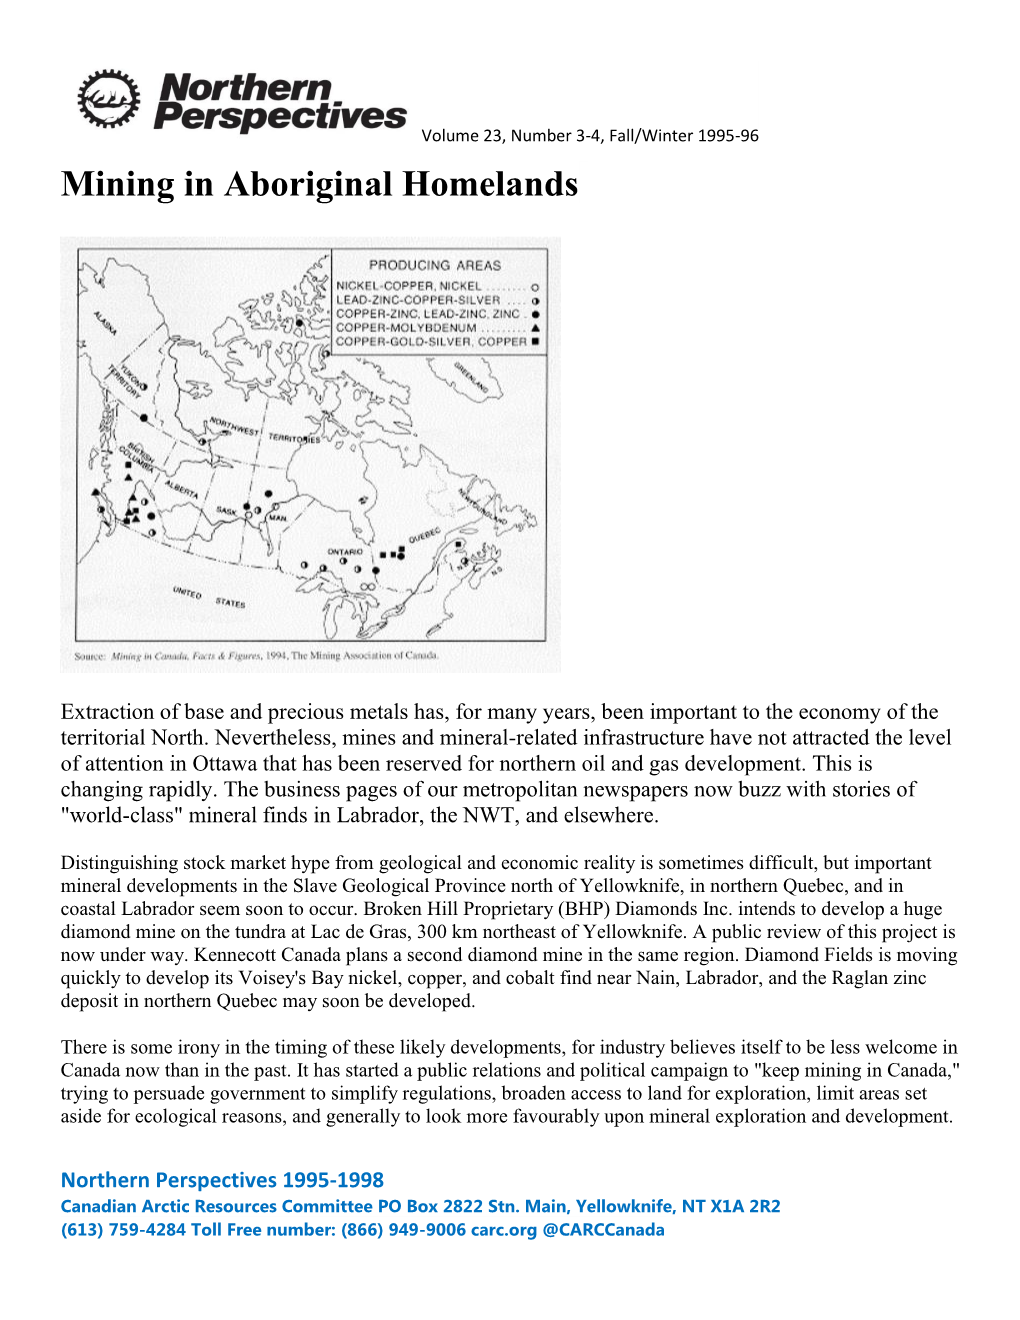 Aboriginal Communities and Mining in Northern Canada 1995/96